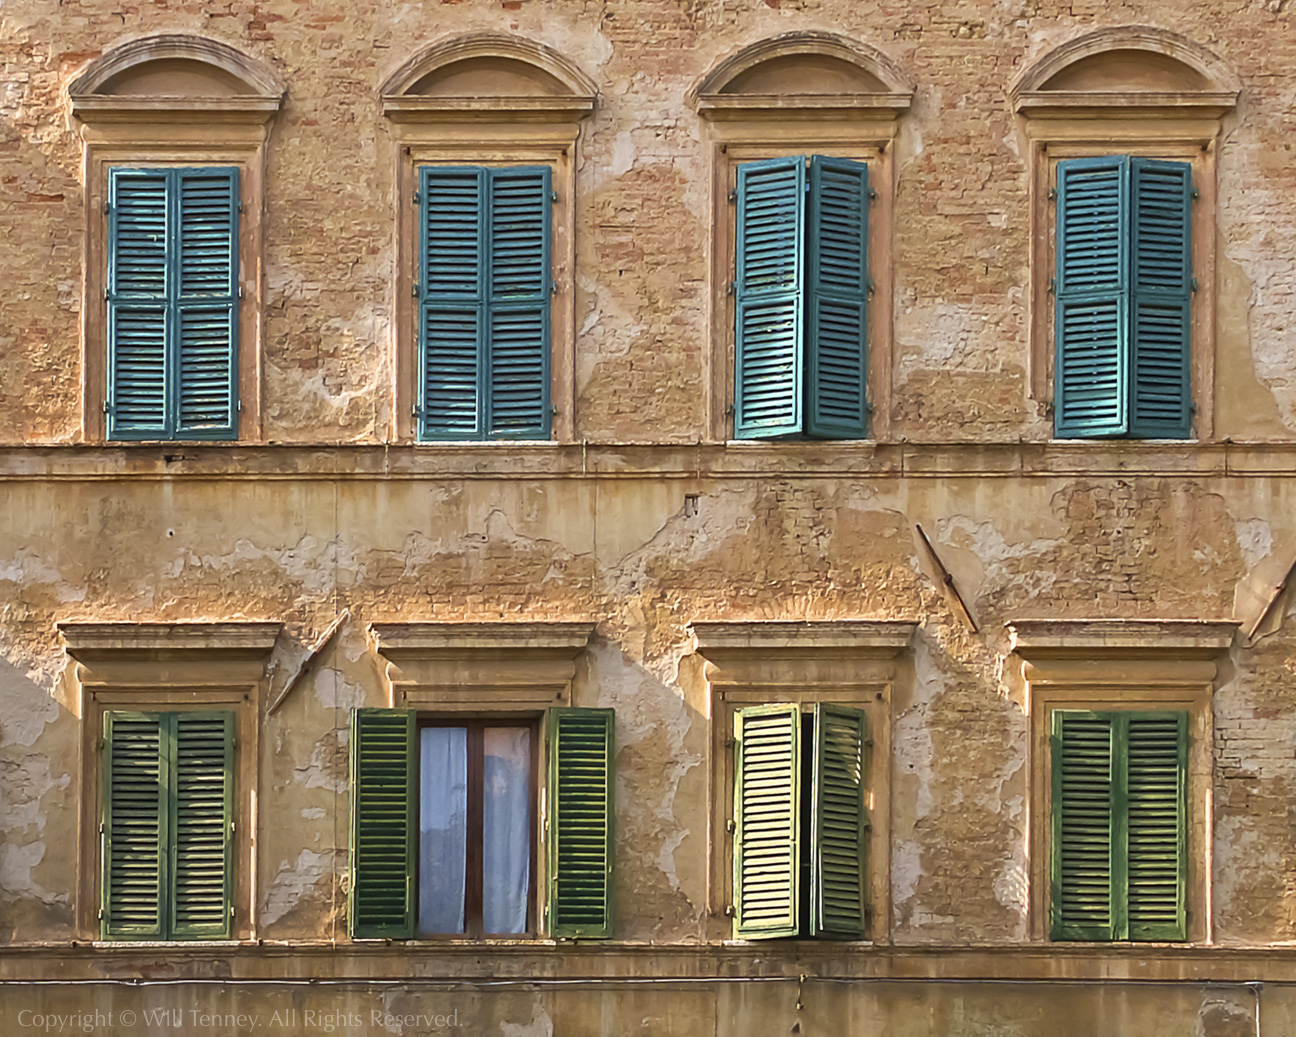 Siena Afternoon: Photograph by Will Tenney